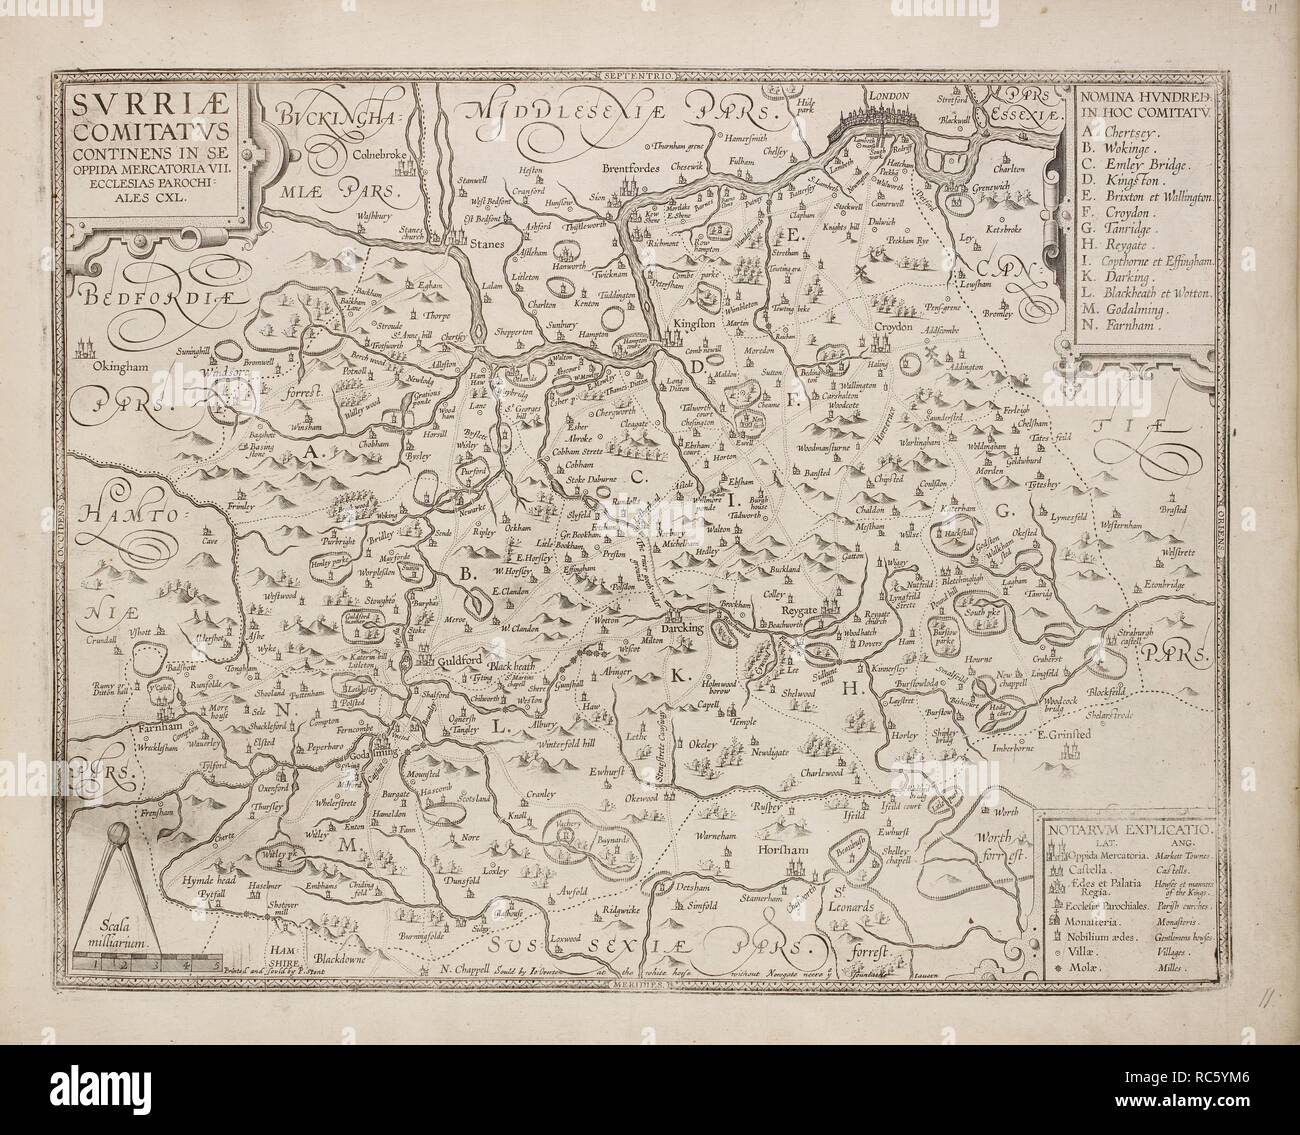 Map of Svrriae Comitatvs or the county of Surrey.  The River Thames. . A collection of 37 Maps of the counties of England. London. H. Overton, 1714. A collection of 37 Maps of the counties of England, being reprints, of J. Speedâ€™s maps, by Henry Overton, together with those of P. Stent reprinted by John Overton, and maps of Derbyshire and Yorkshire engraved by S. Nicholls. Source: Maps.145.c.9 11. Language: Latin. Stock Photo